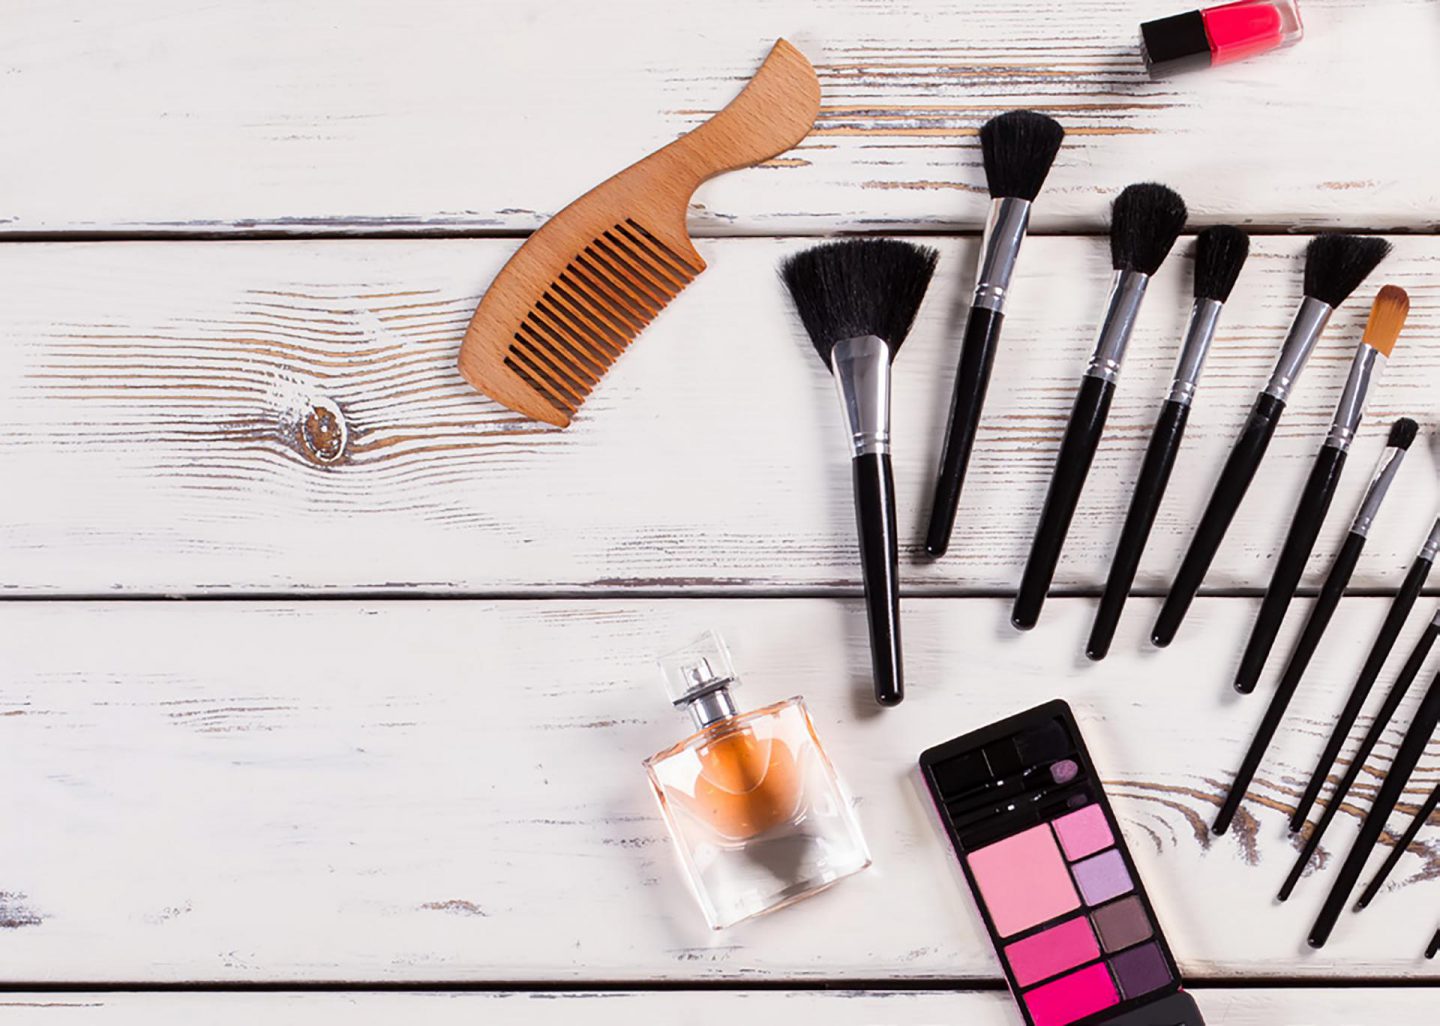 Time to Shake up your Makeup Routine